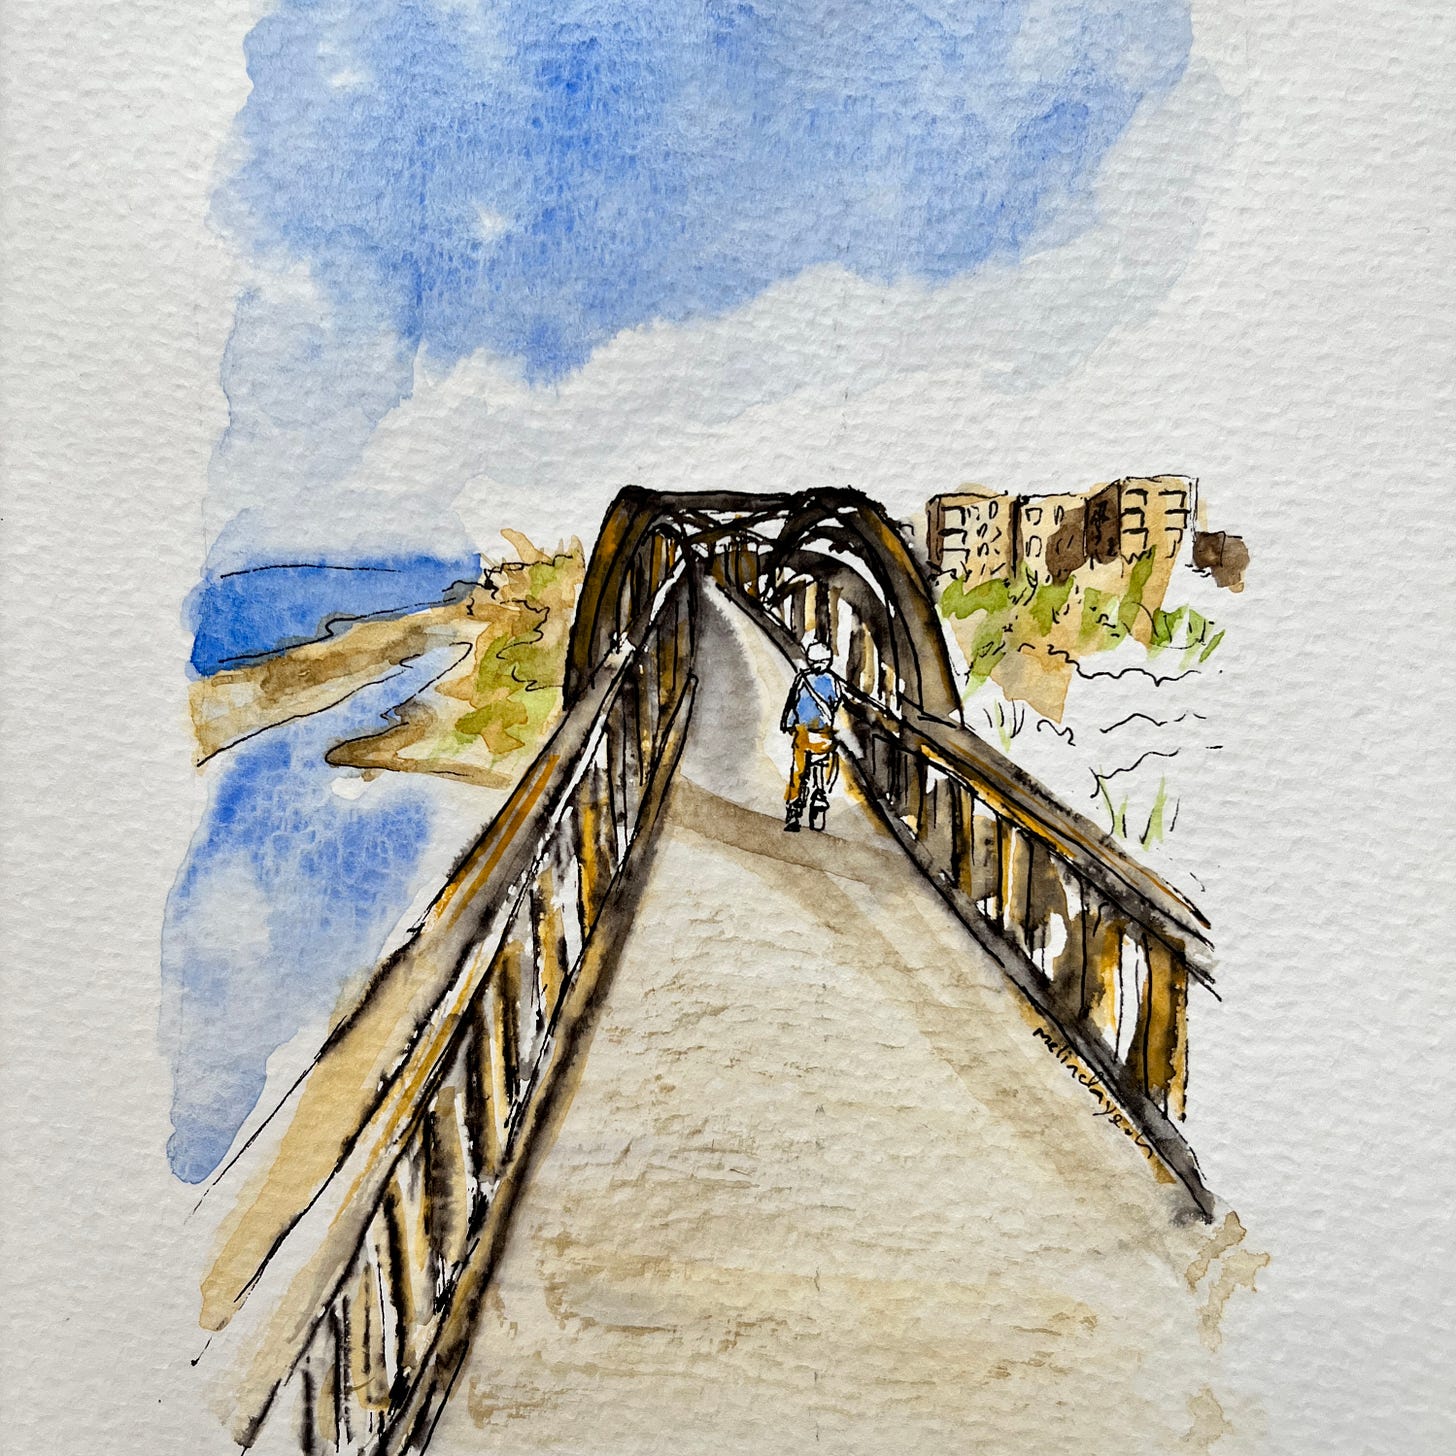 Image: A painting of a scenery at the bridge at the mouth of the Onda River, towards VILA DO CONDE, Portugal, with a man in the distant seen from the back, on a bicycle. It’s in black water-soluble ink and looser watercolour (blue skies, splashes of light brown, and speckles of green)